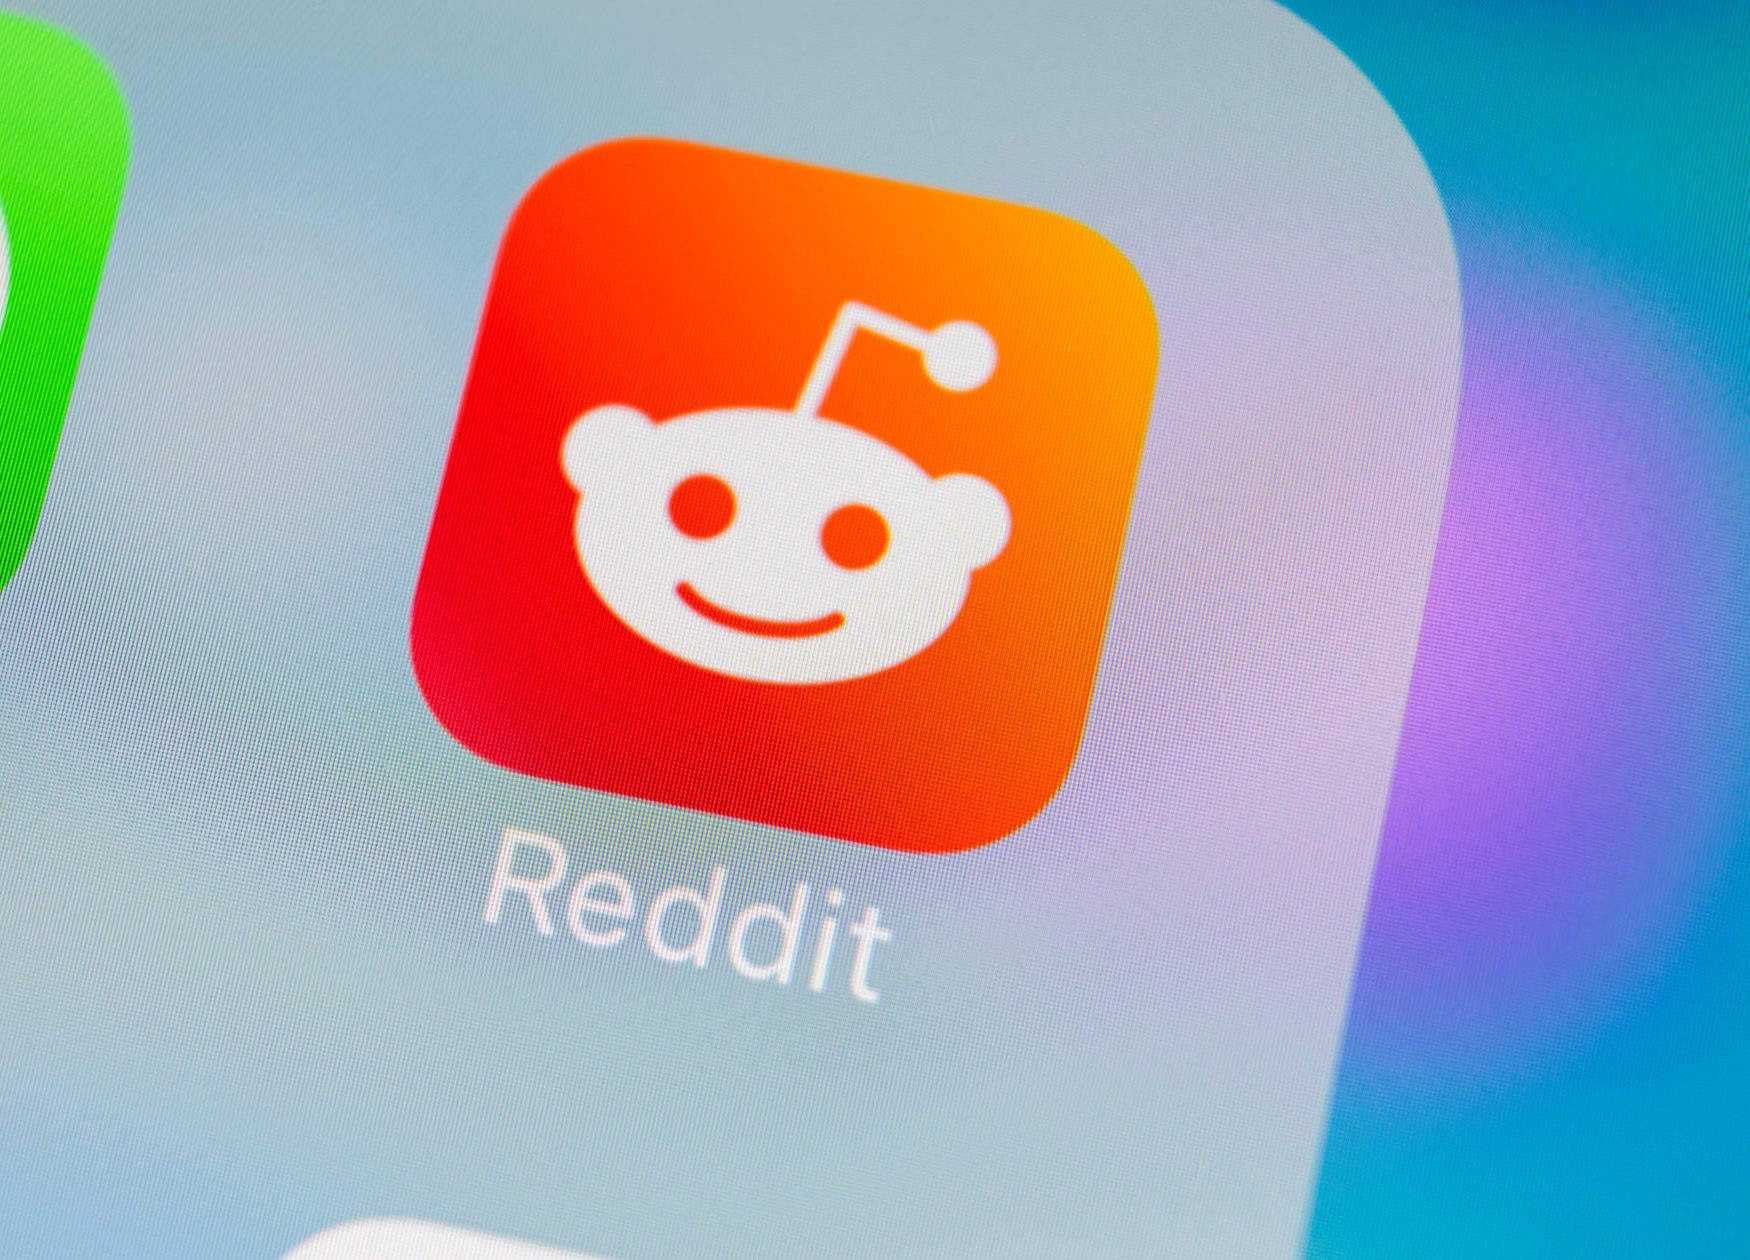 Reddit data breach shows flaws of SMS-based authentication